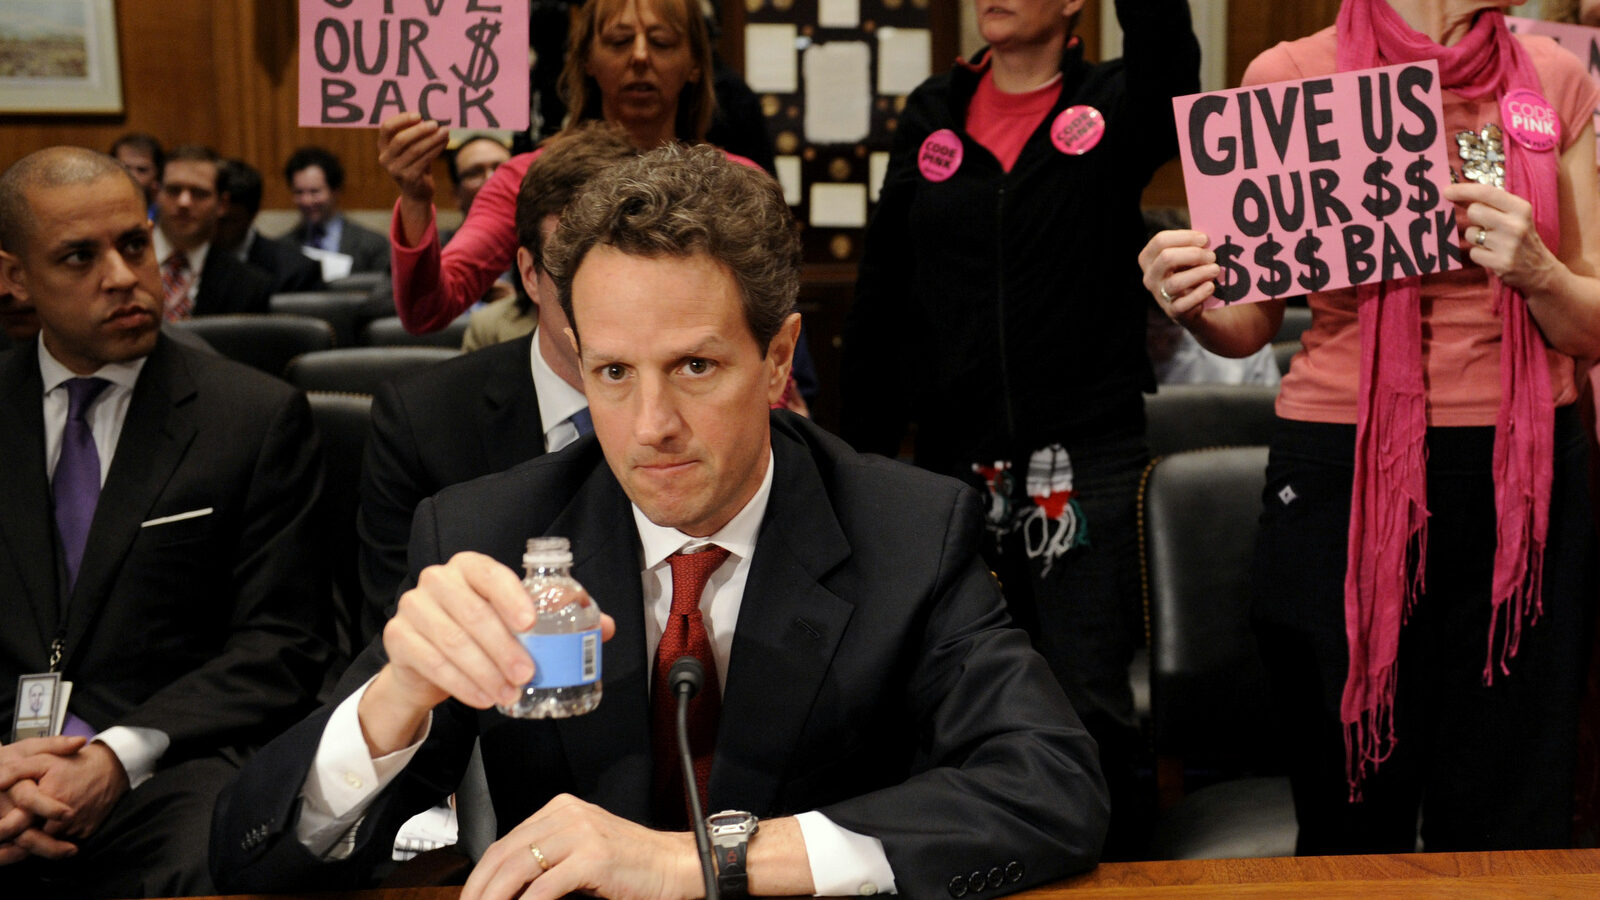 Members of CodePink stand behind Treasury Secretary Timothy Geithner on Capitol Hill in Washington, Tuesday, April 21, 2009, prior to his testifying before the Congressional Oversight Panel hearing on the Troubled Asset Relief Program (TARP).